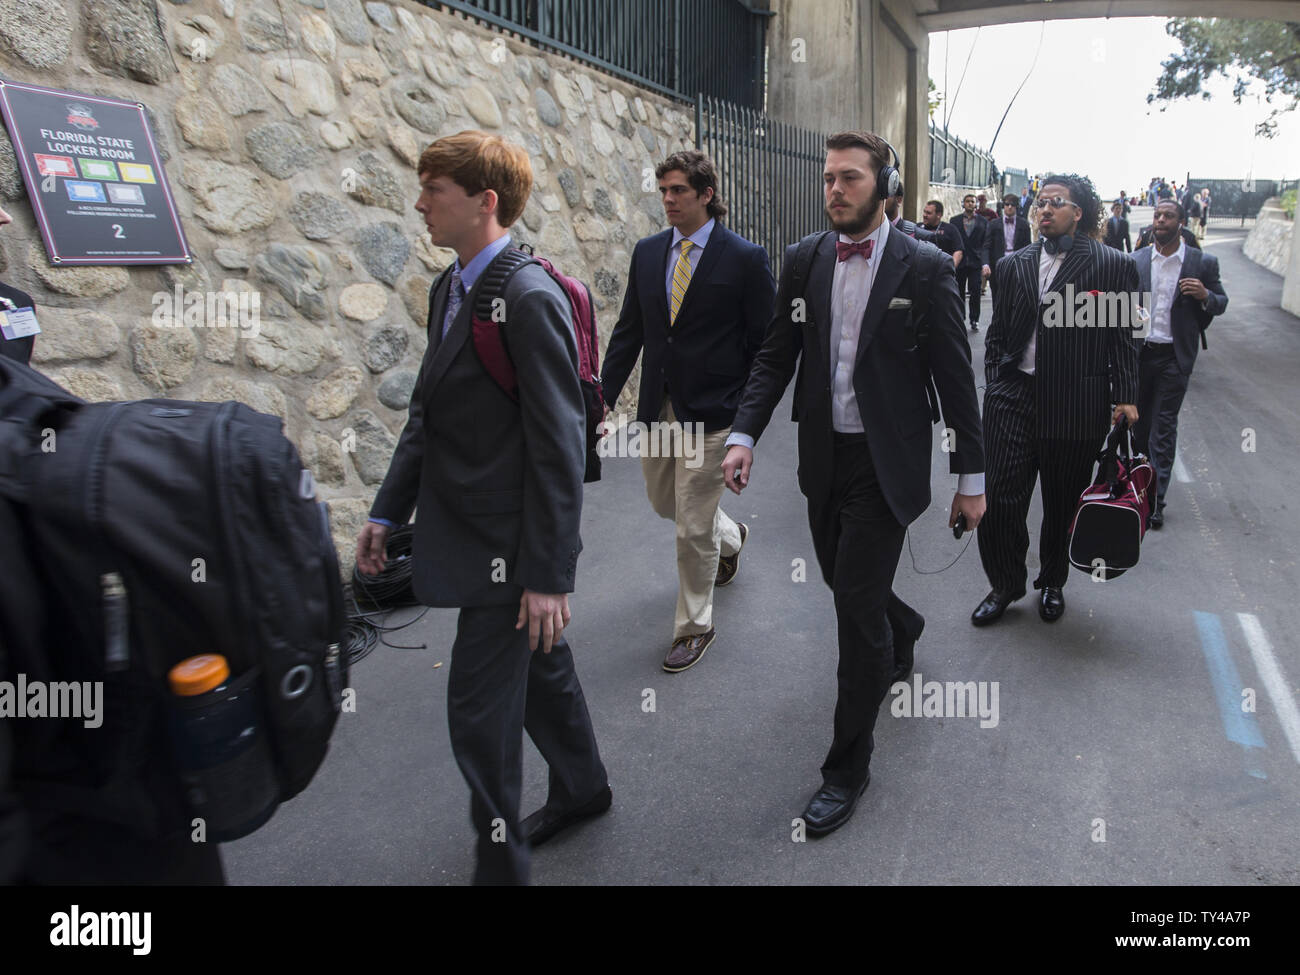 The Florida State Seminole football team arrives prior to the BCS national title game at the Rose Bowl in Pasadena, California on January 6, 2014.  UPI/Mark Wallheiser Stock Photo